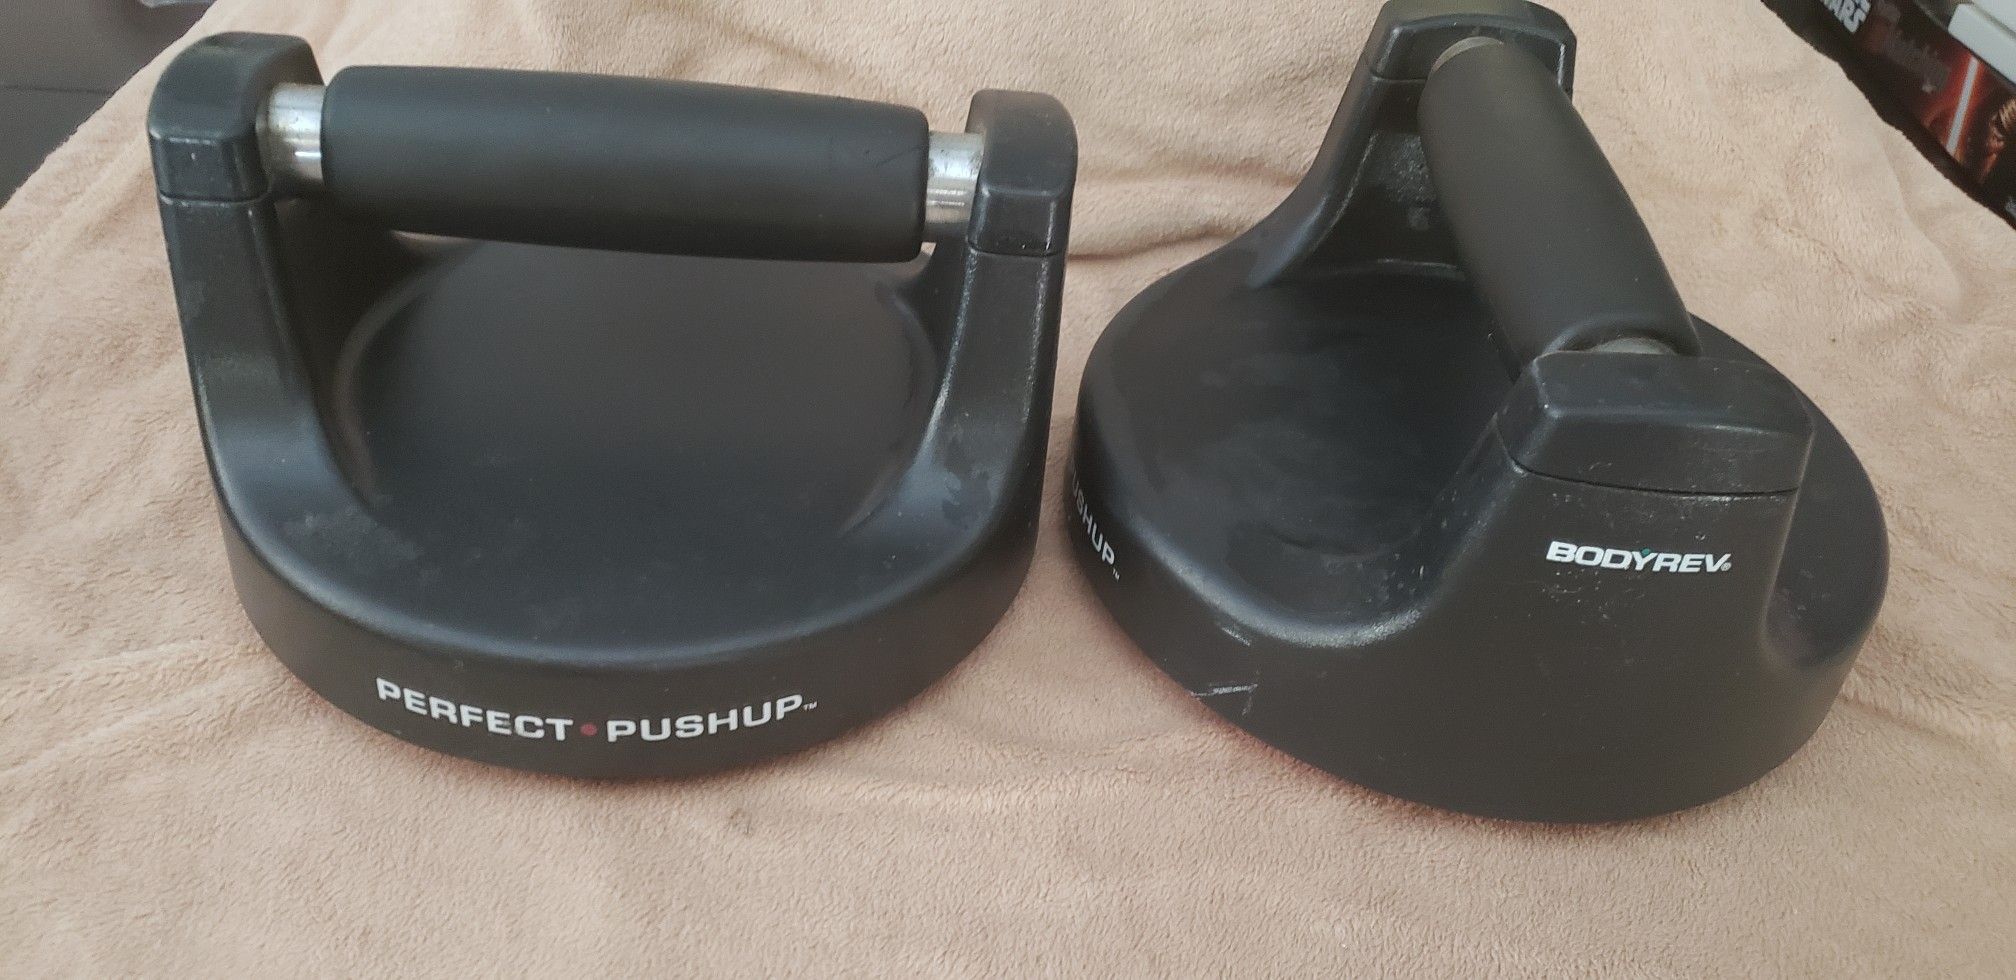 PERFECT PUSHUP EXERCISE EQUIPMENT